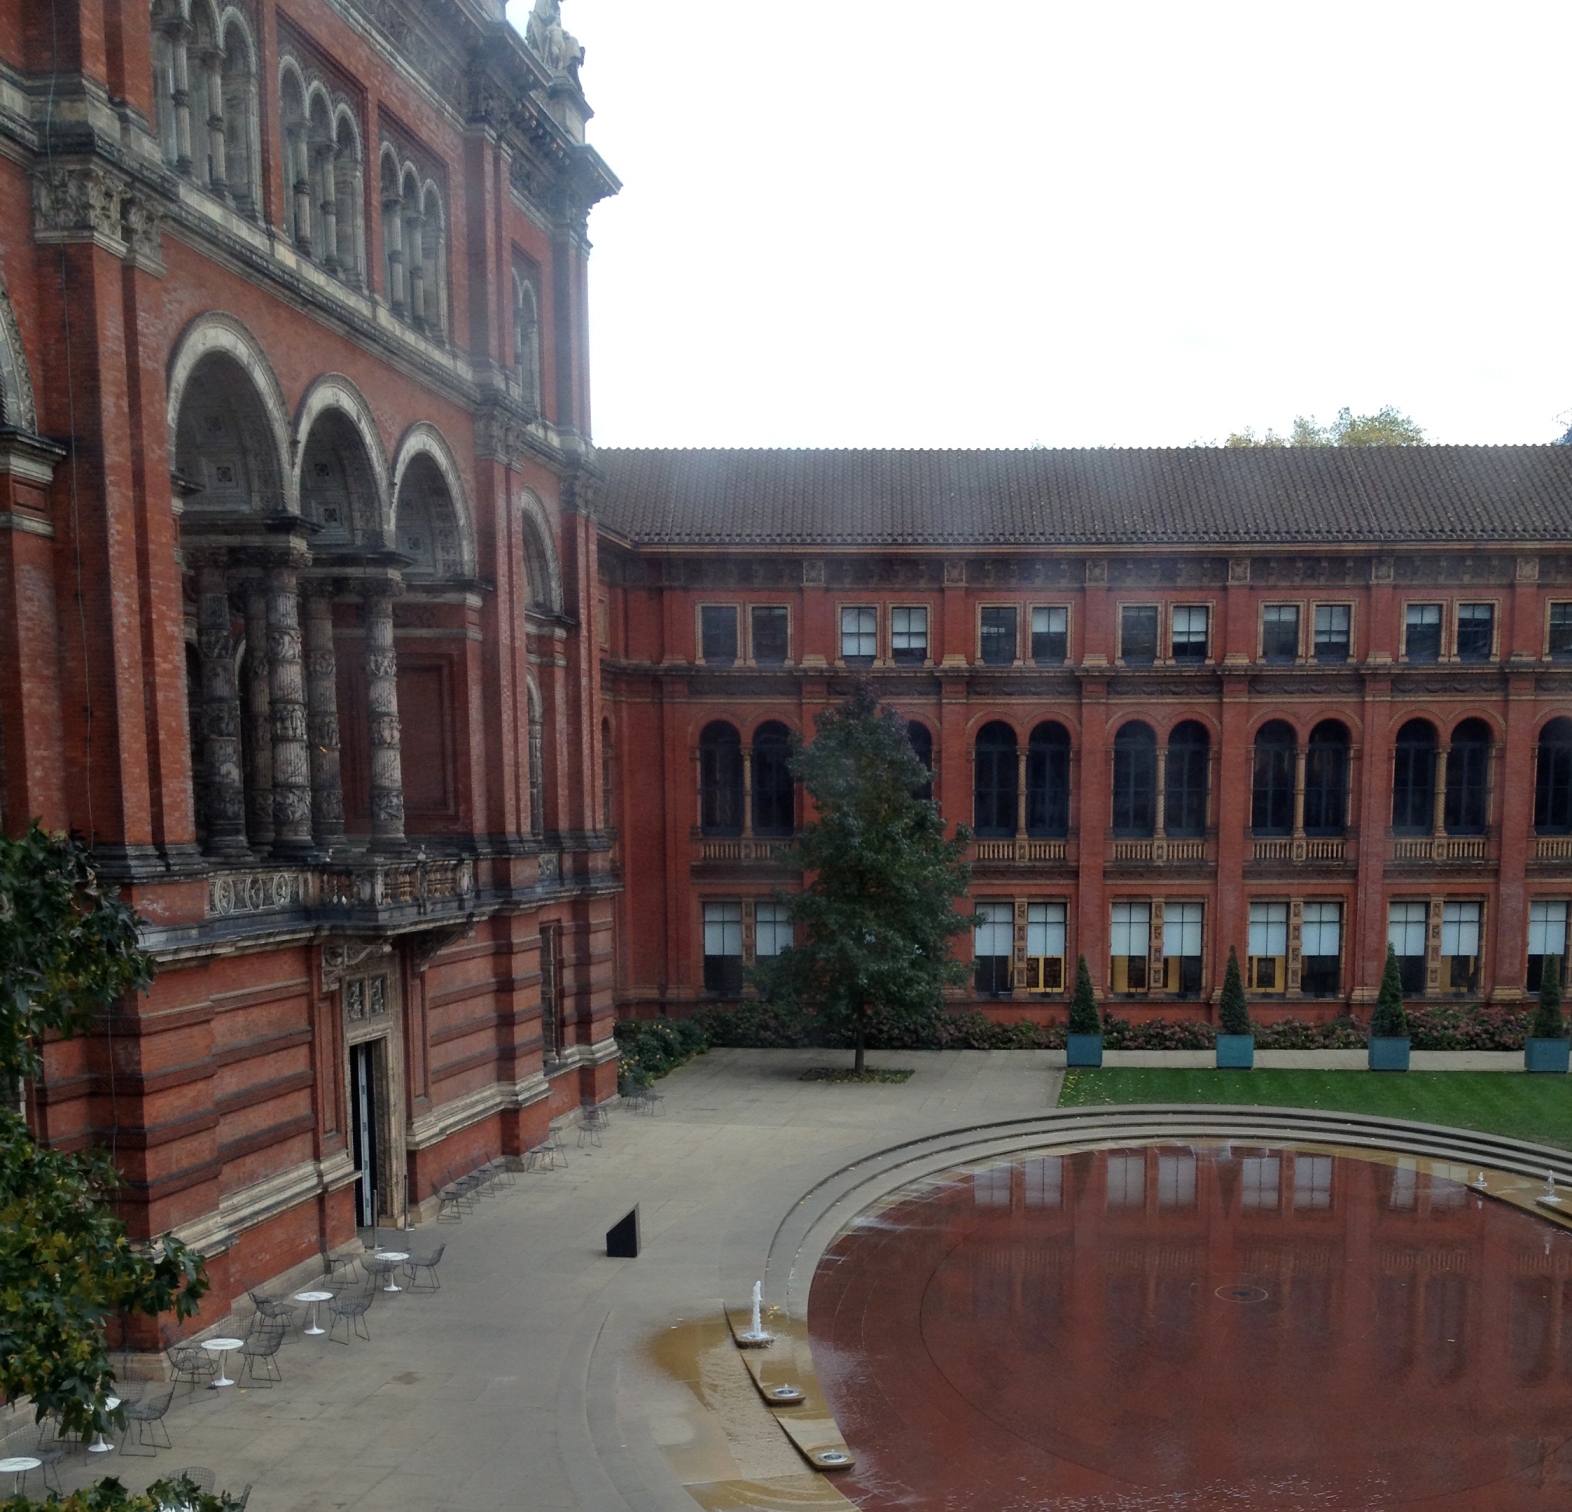 The National Art Library, V&A